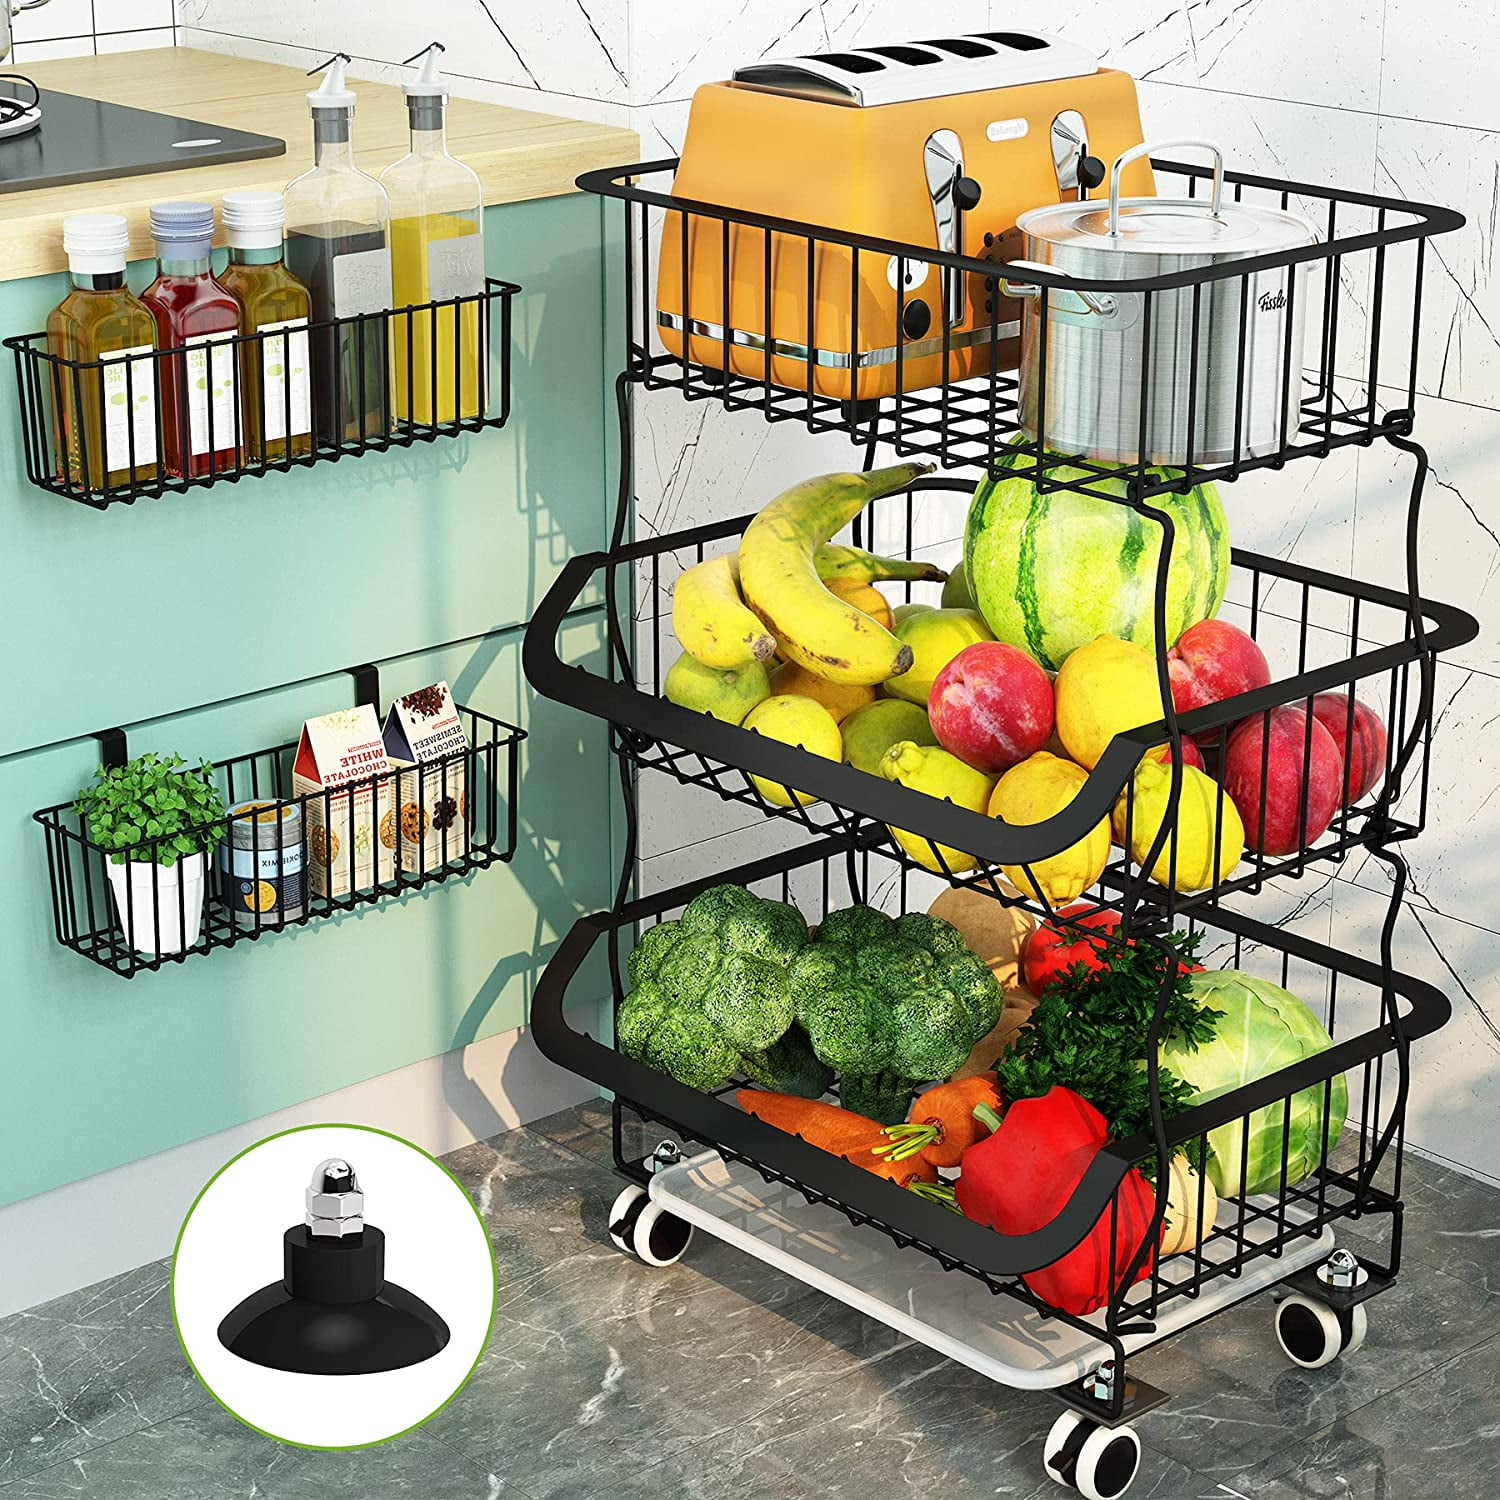 1pc Fruit Vegetable Storage Basket For Kitchen 3/4/5 Tiers Stackable Metal  Wire Baskets Cart With Rolling Wheels Utility Fruits Rack Produce Snack Org